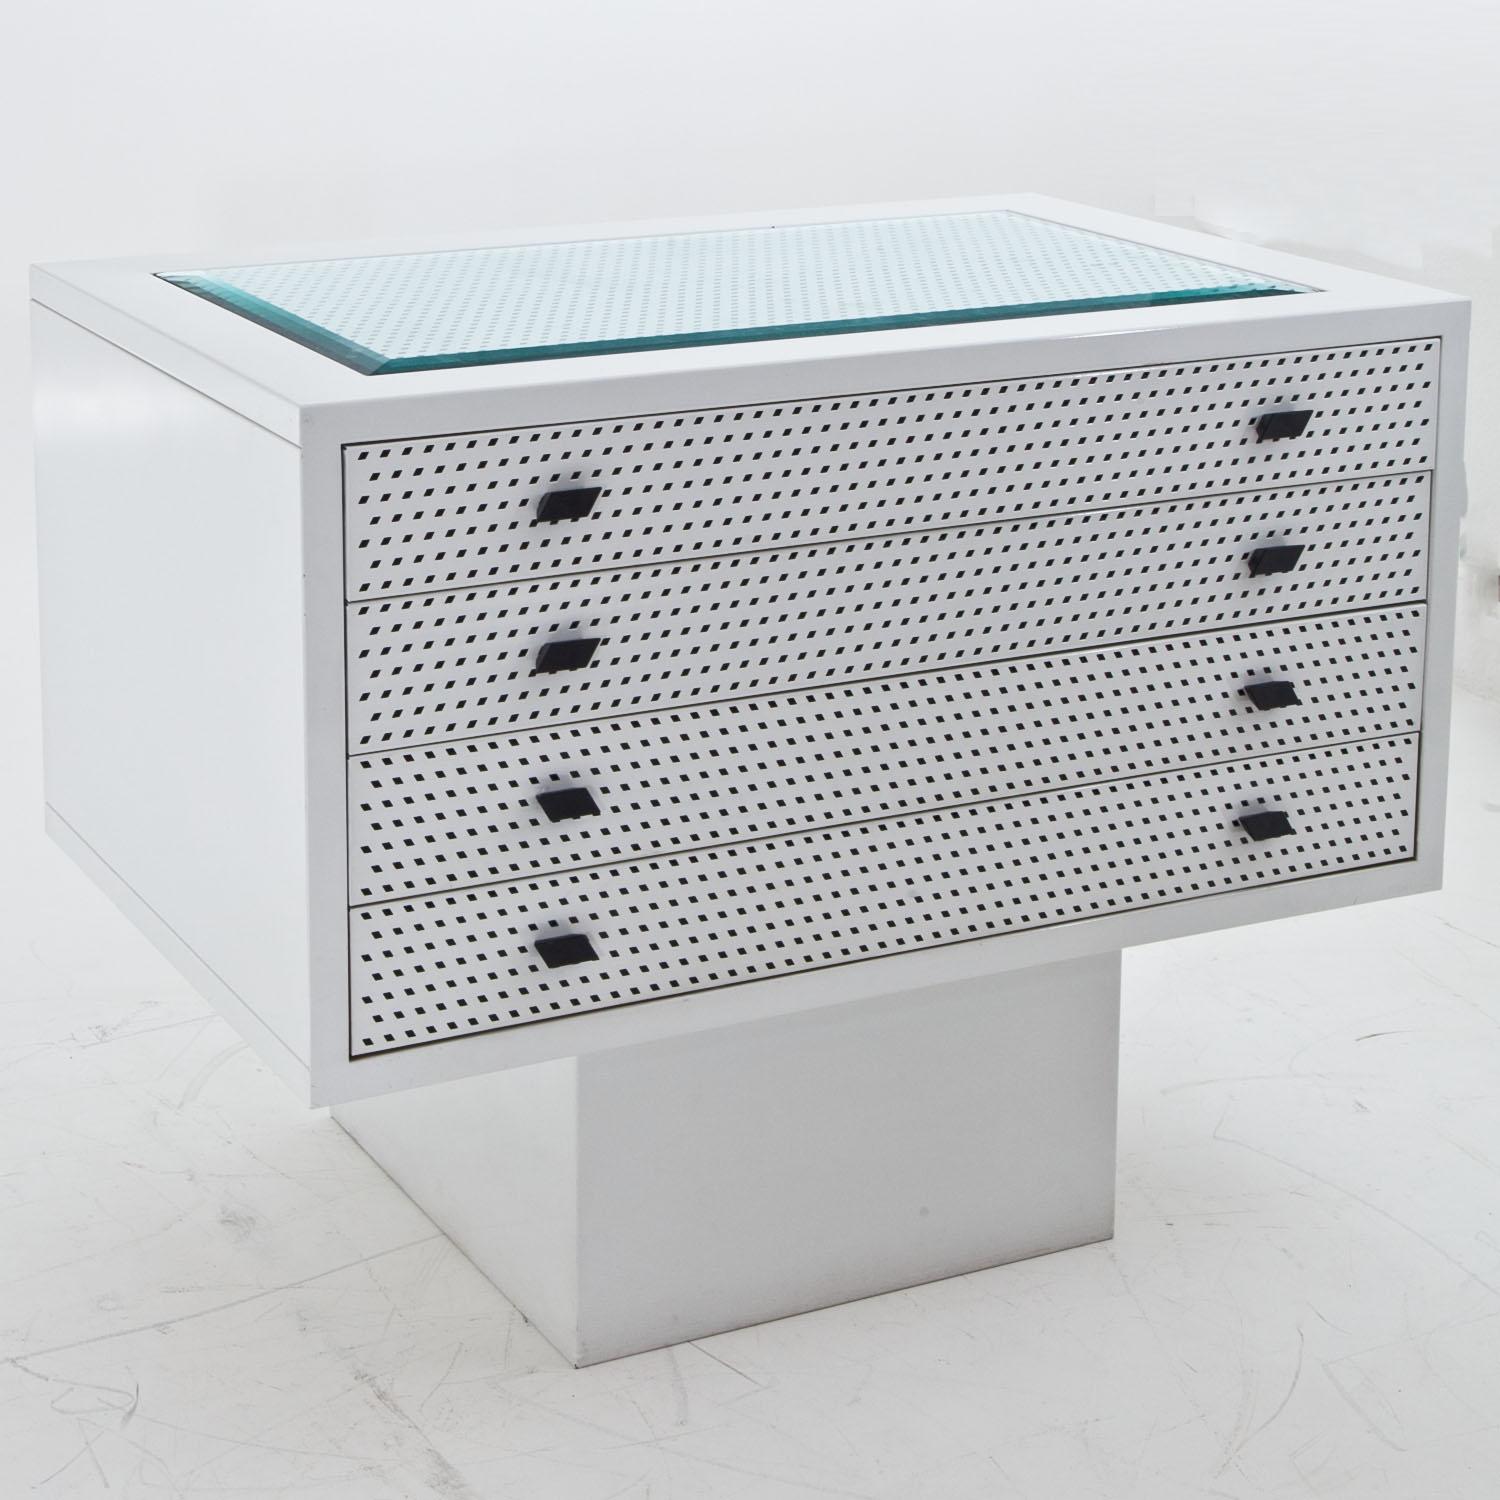 Steel Chest of Drawers by Matteo Thun for Bieffeplast, Italy, 1985